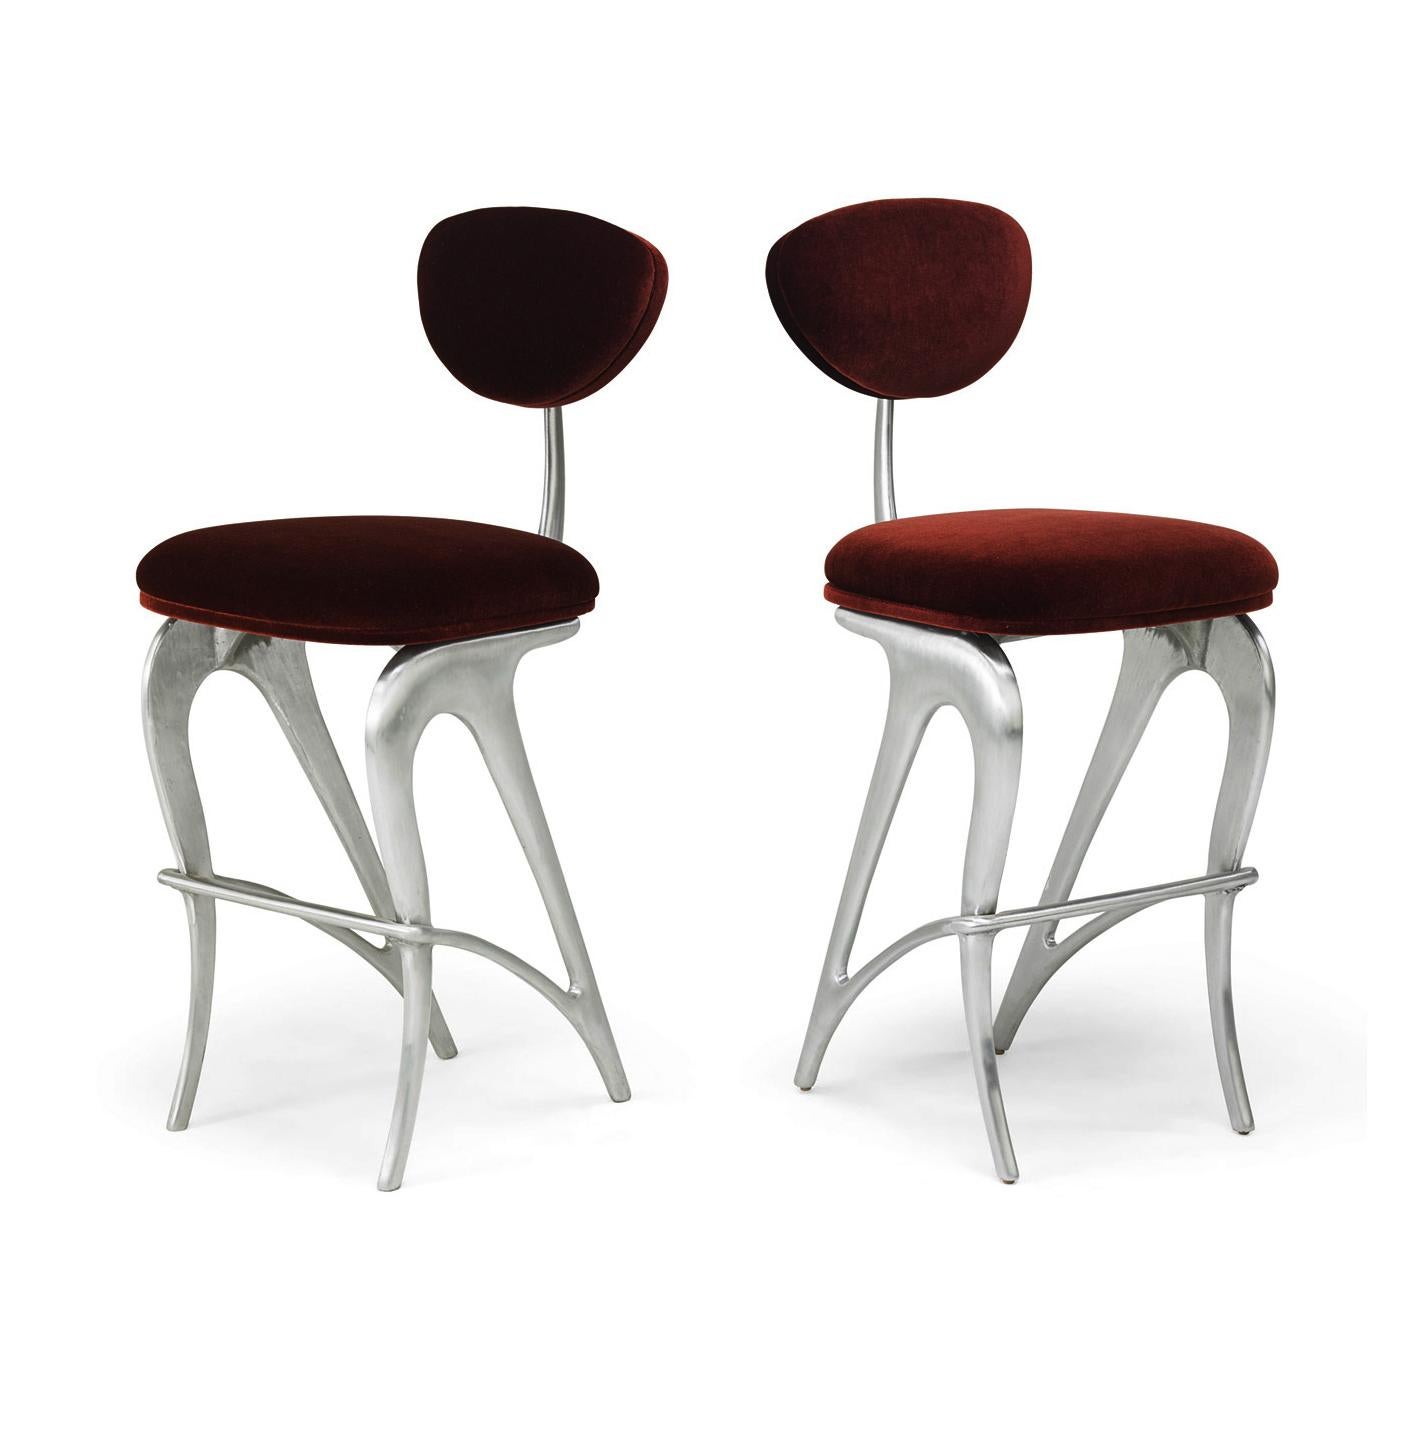 Jordan Mozer, (b.1958), Hudson Club S

Stools, Chicago, Il. 1998/2016. Cast and Polished Recycled Magnesium Aluminum Alloy, Wool Mohair Upholstery. Provenance: collection of the artist. Raised signature and model number. Measurements: 47.5” high x